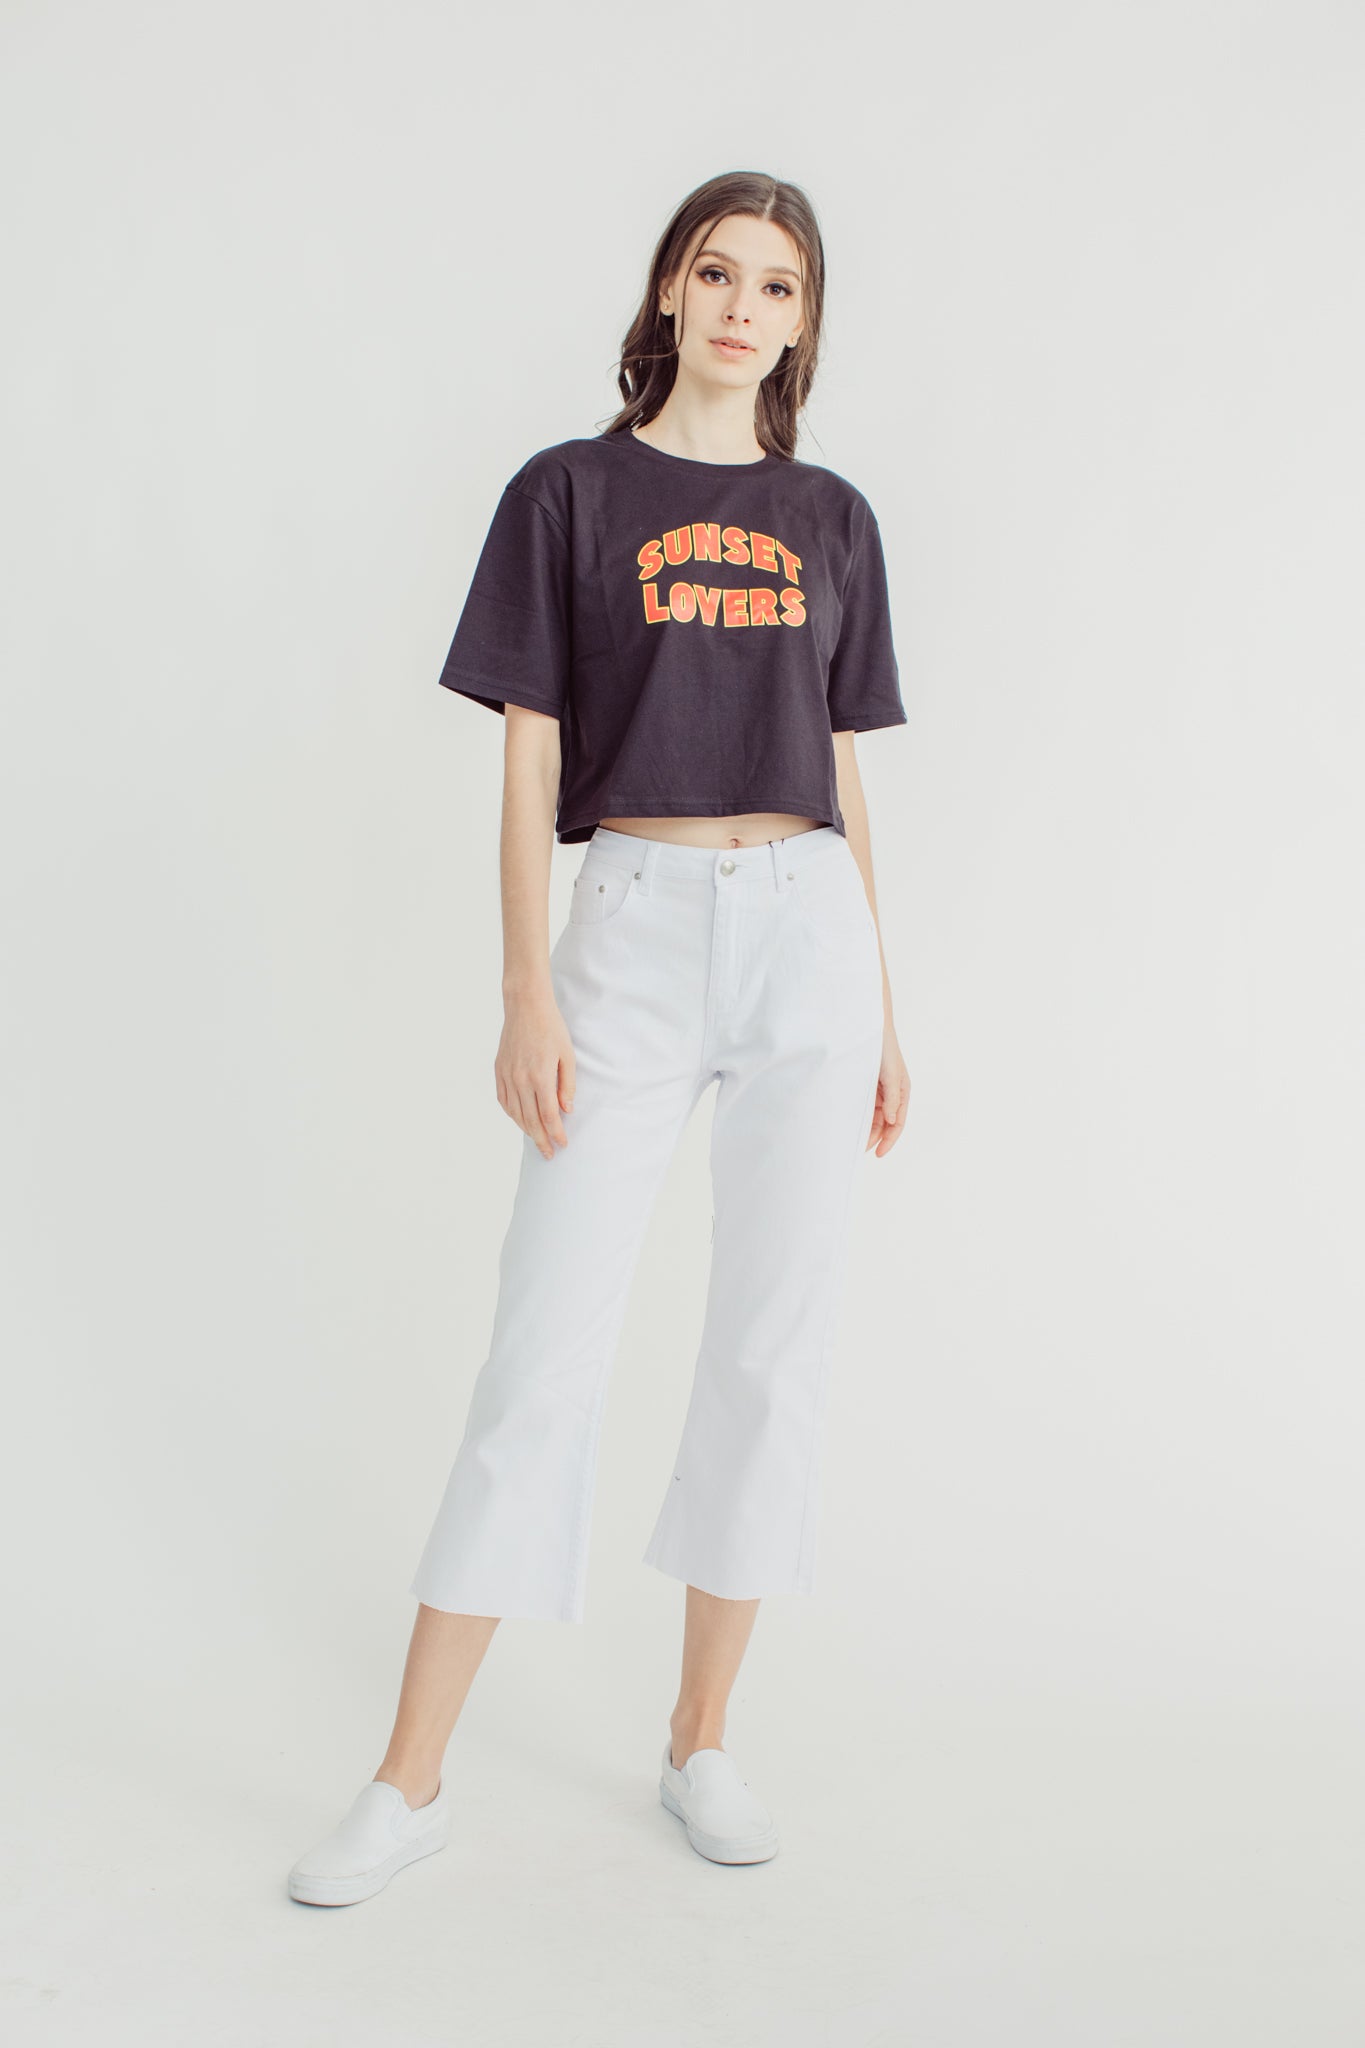 Black with Sunset Lovers Statement Design Modern Cropped Fit Tee - Mossimo PH